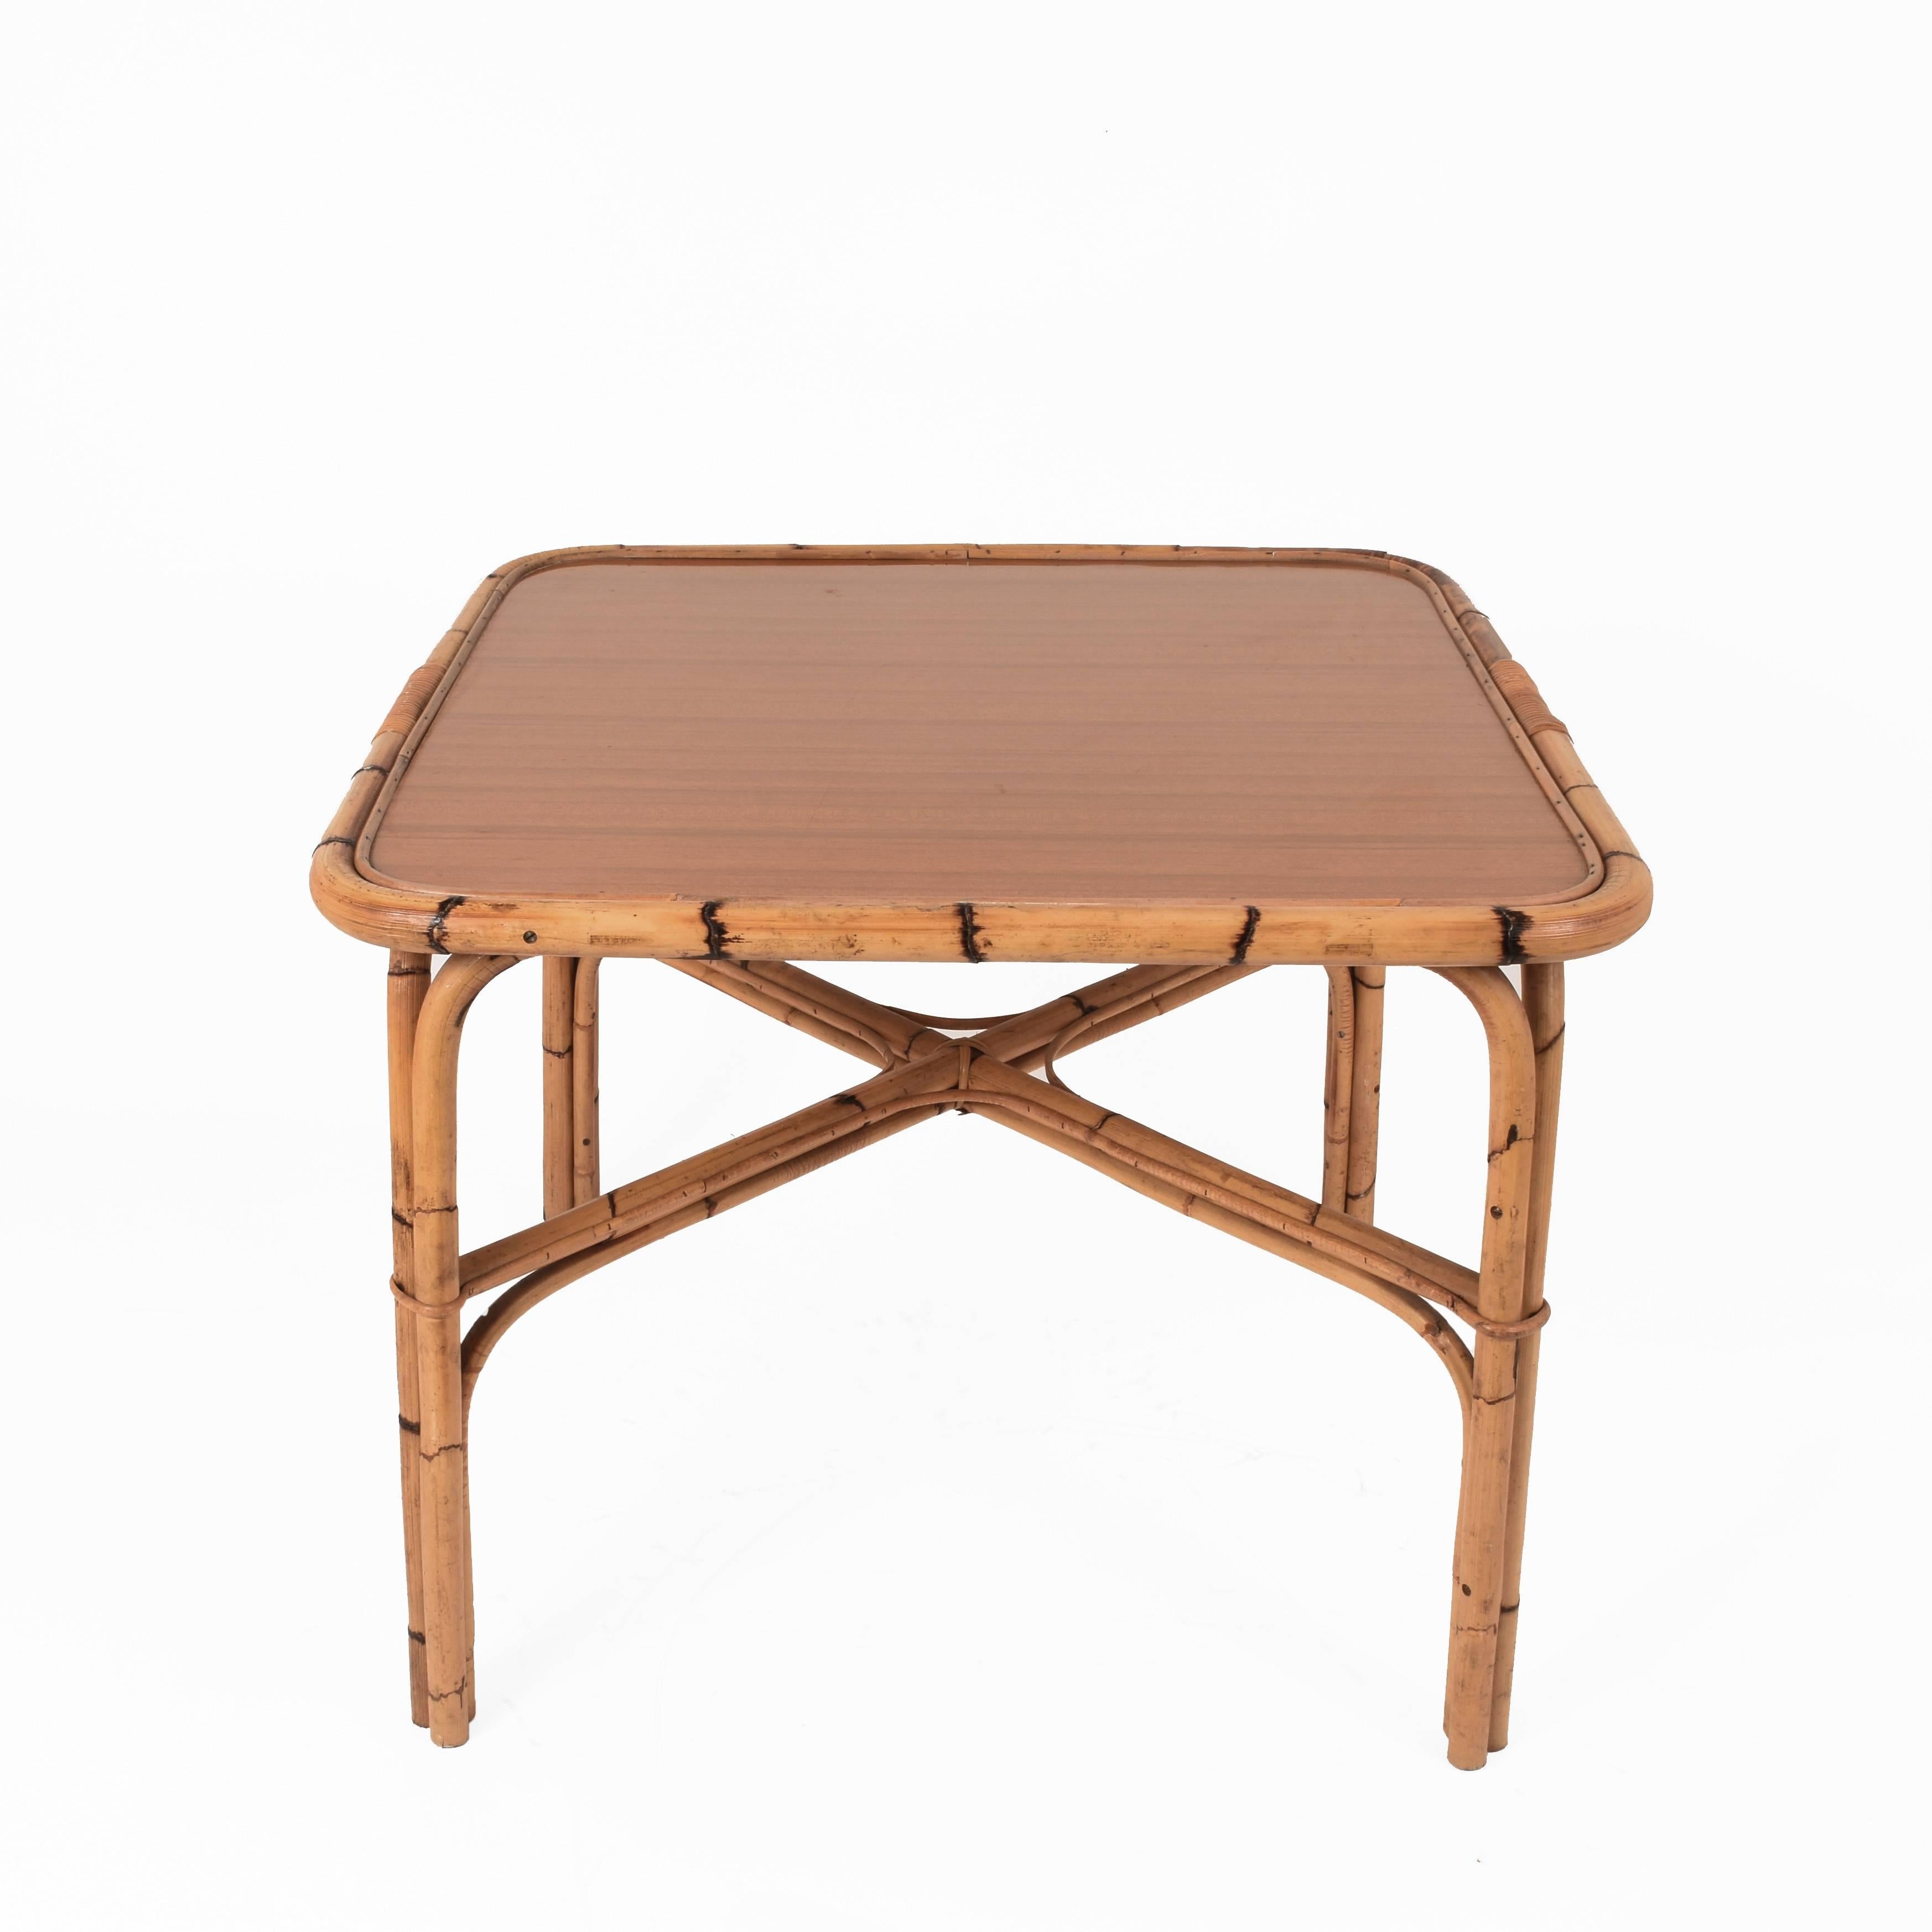 Wonderful midcentury squared bamboo table with Formica Laminated Top. The item was produced during the 1960s in Italy.

The item is made of a clean laminated formica top sustained on the sides by bamboo canes, which compose the structure of the